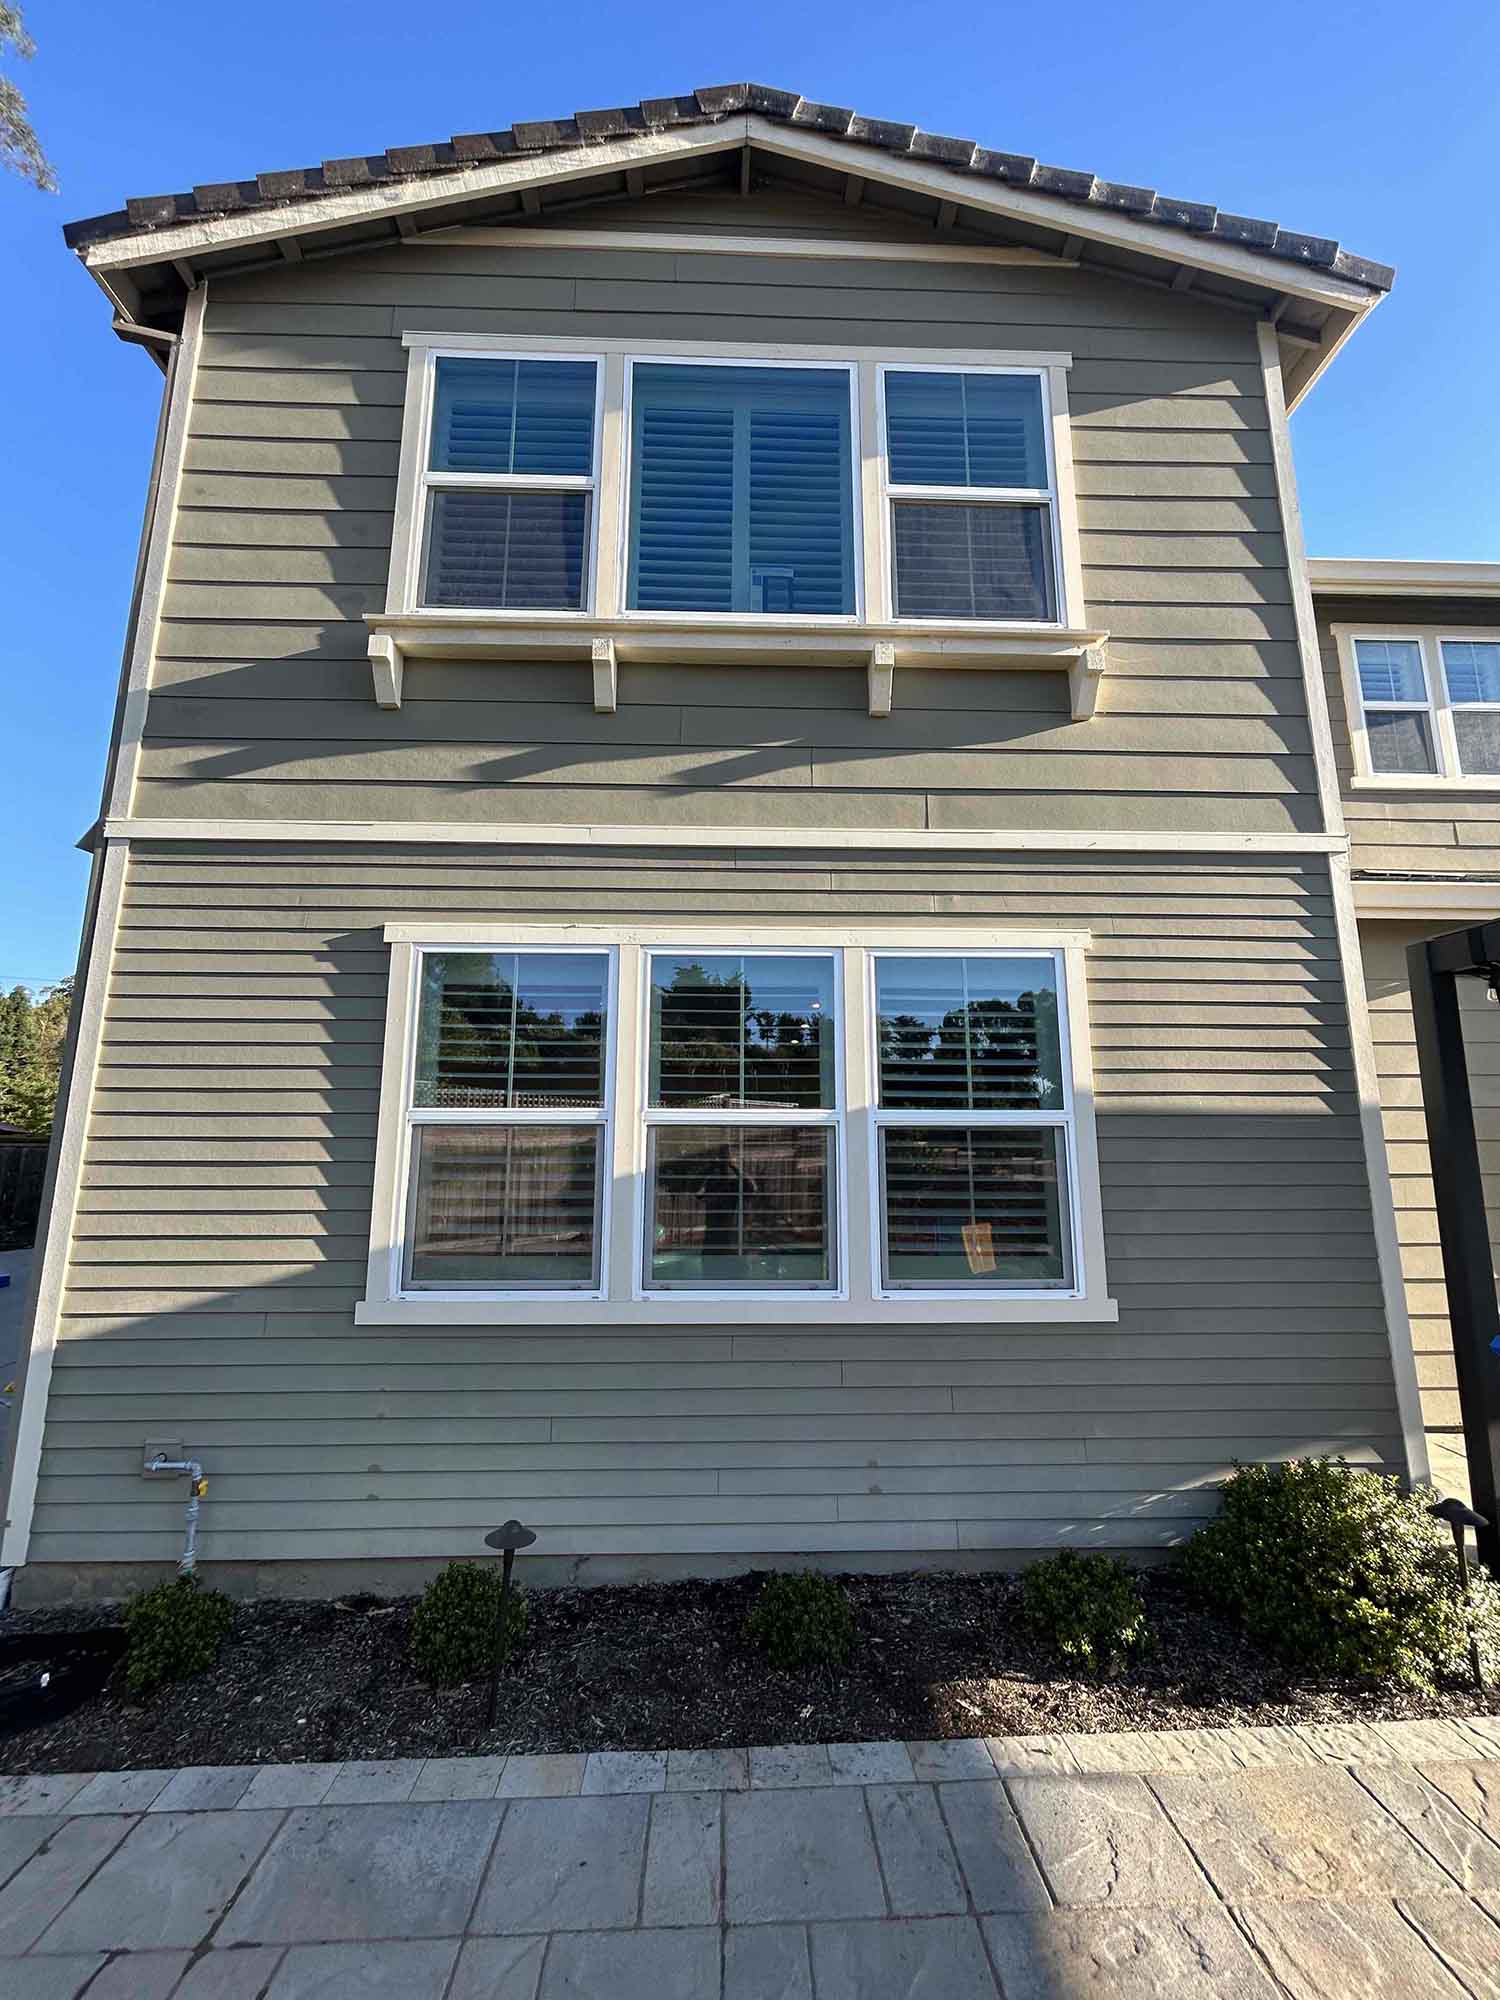 The ClimatePro team installed 3M Prestige Exterior Film on the windows of this Cotati, CA home. Get a free estimate for yours!